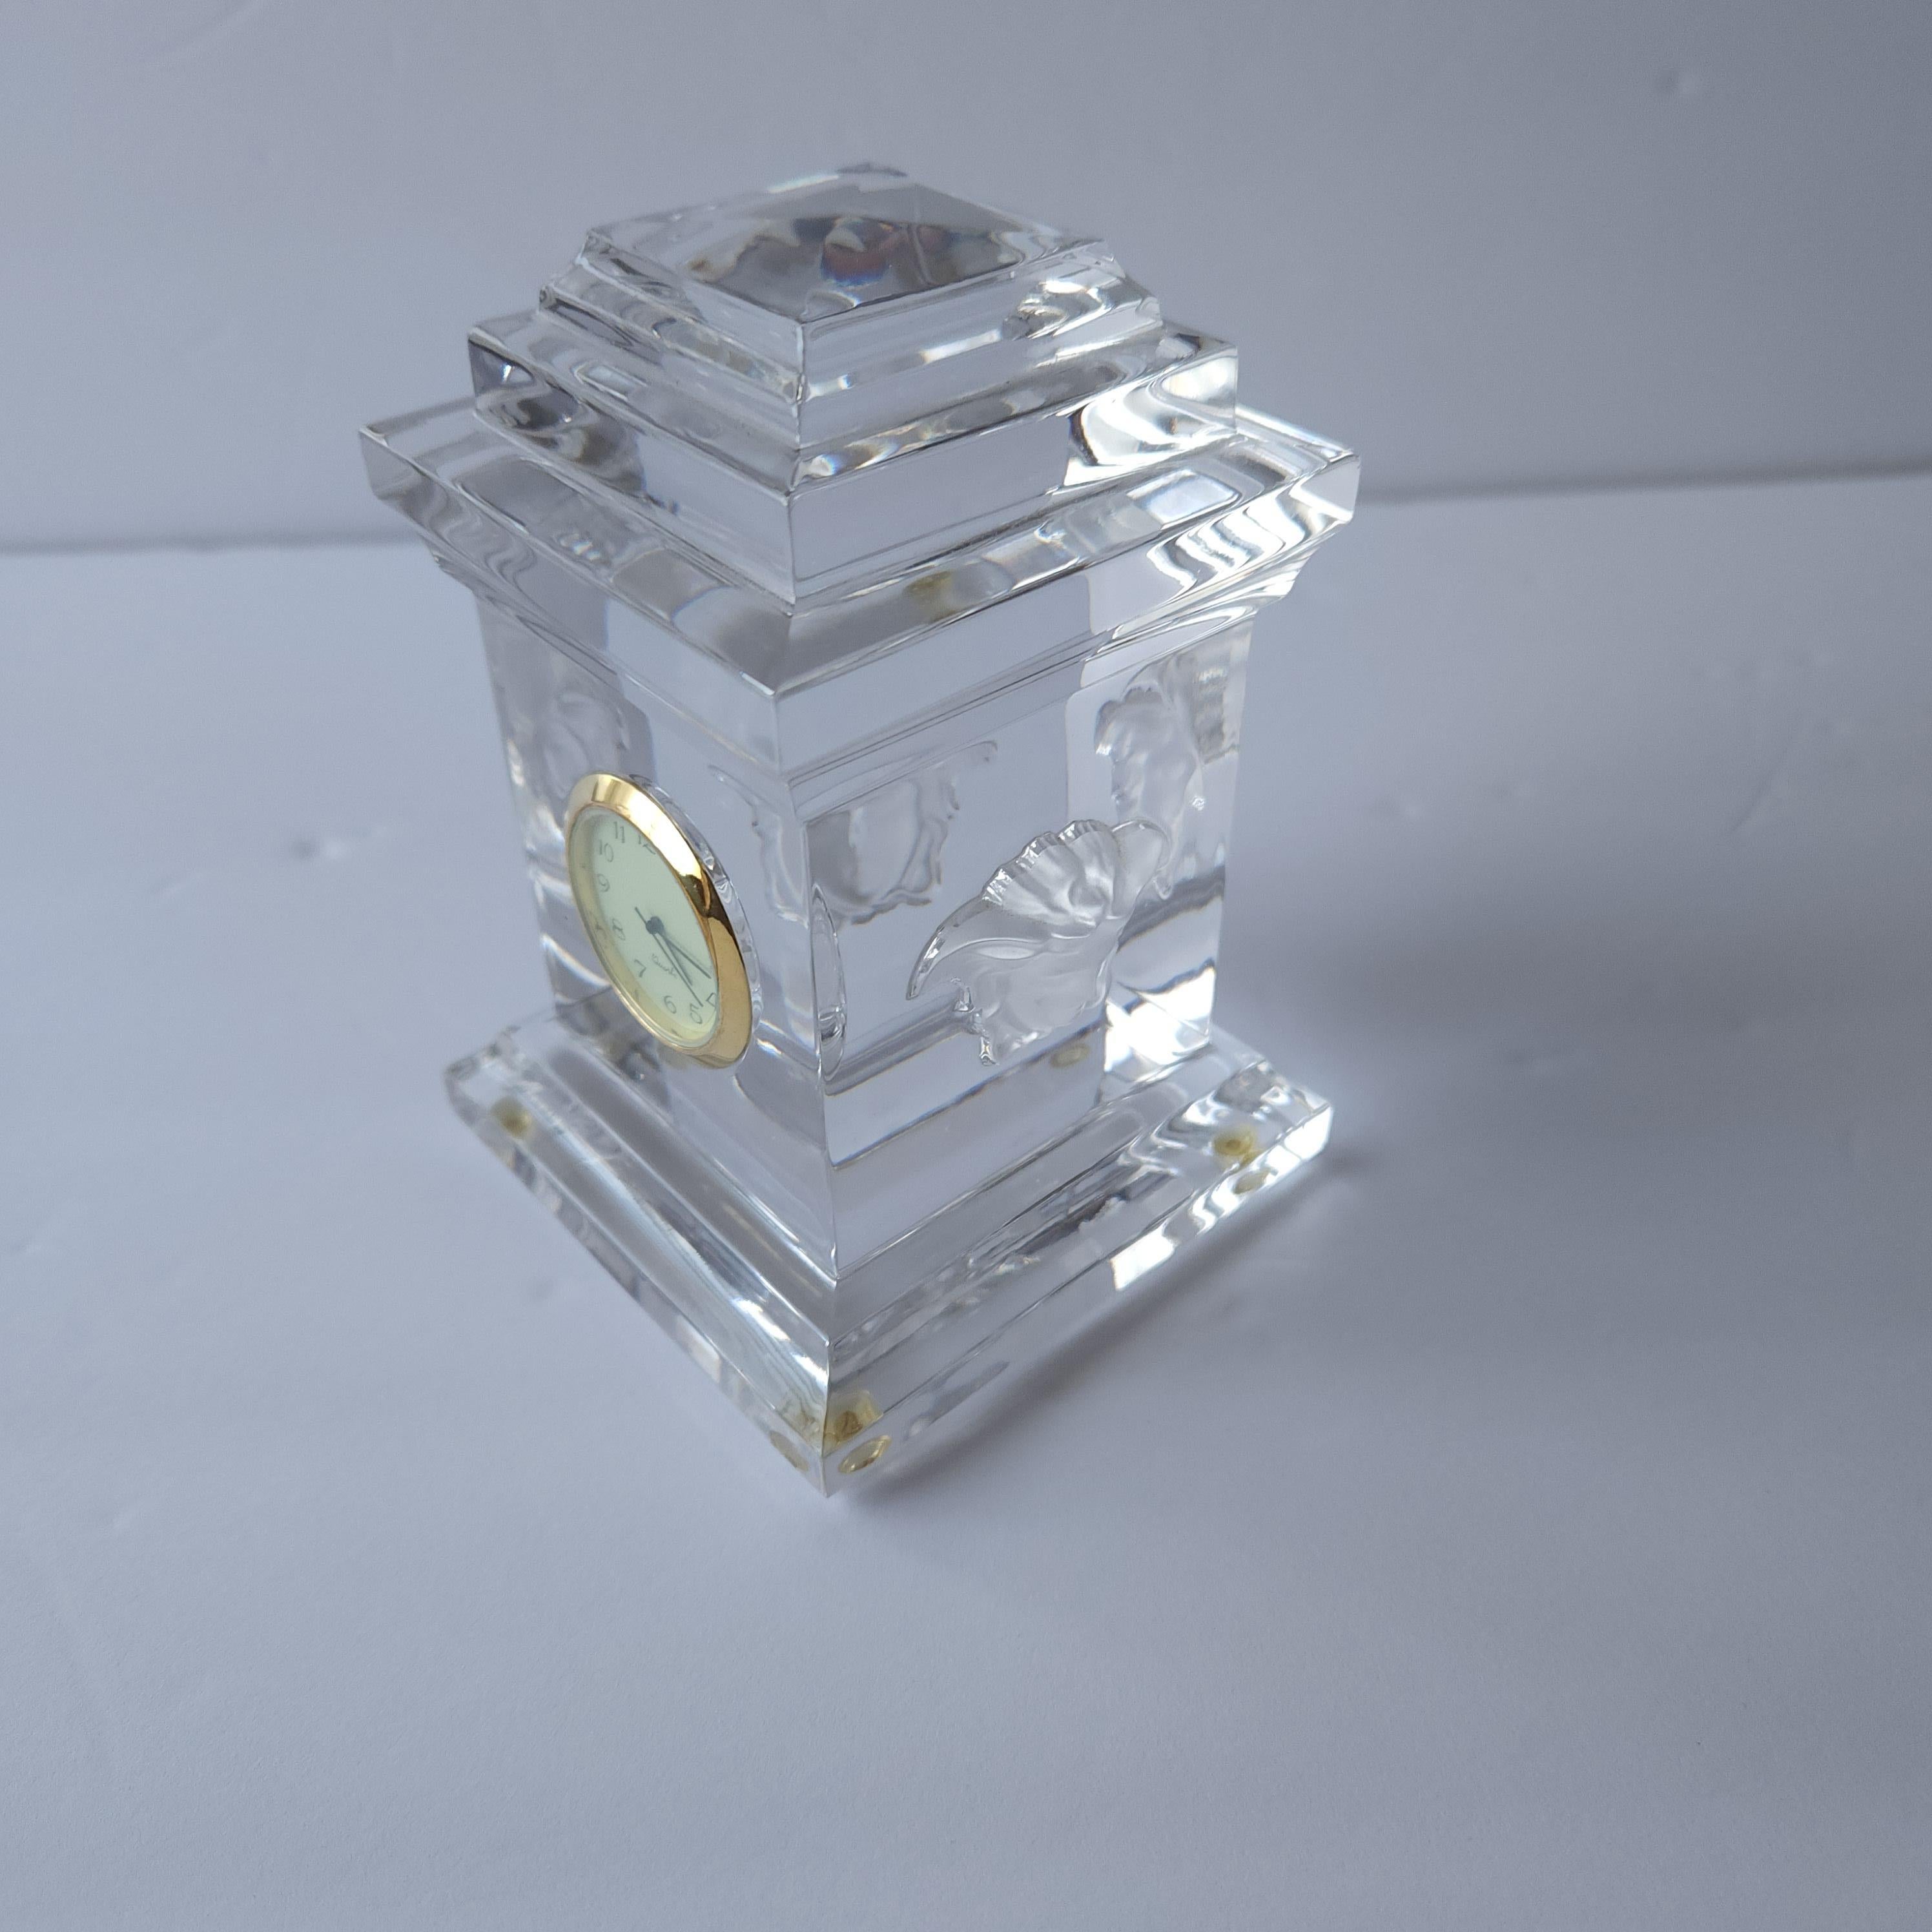 1980s Versace Medusa Desk Clock by Rosenthal in Lumiere Crystal Glass 8